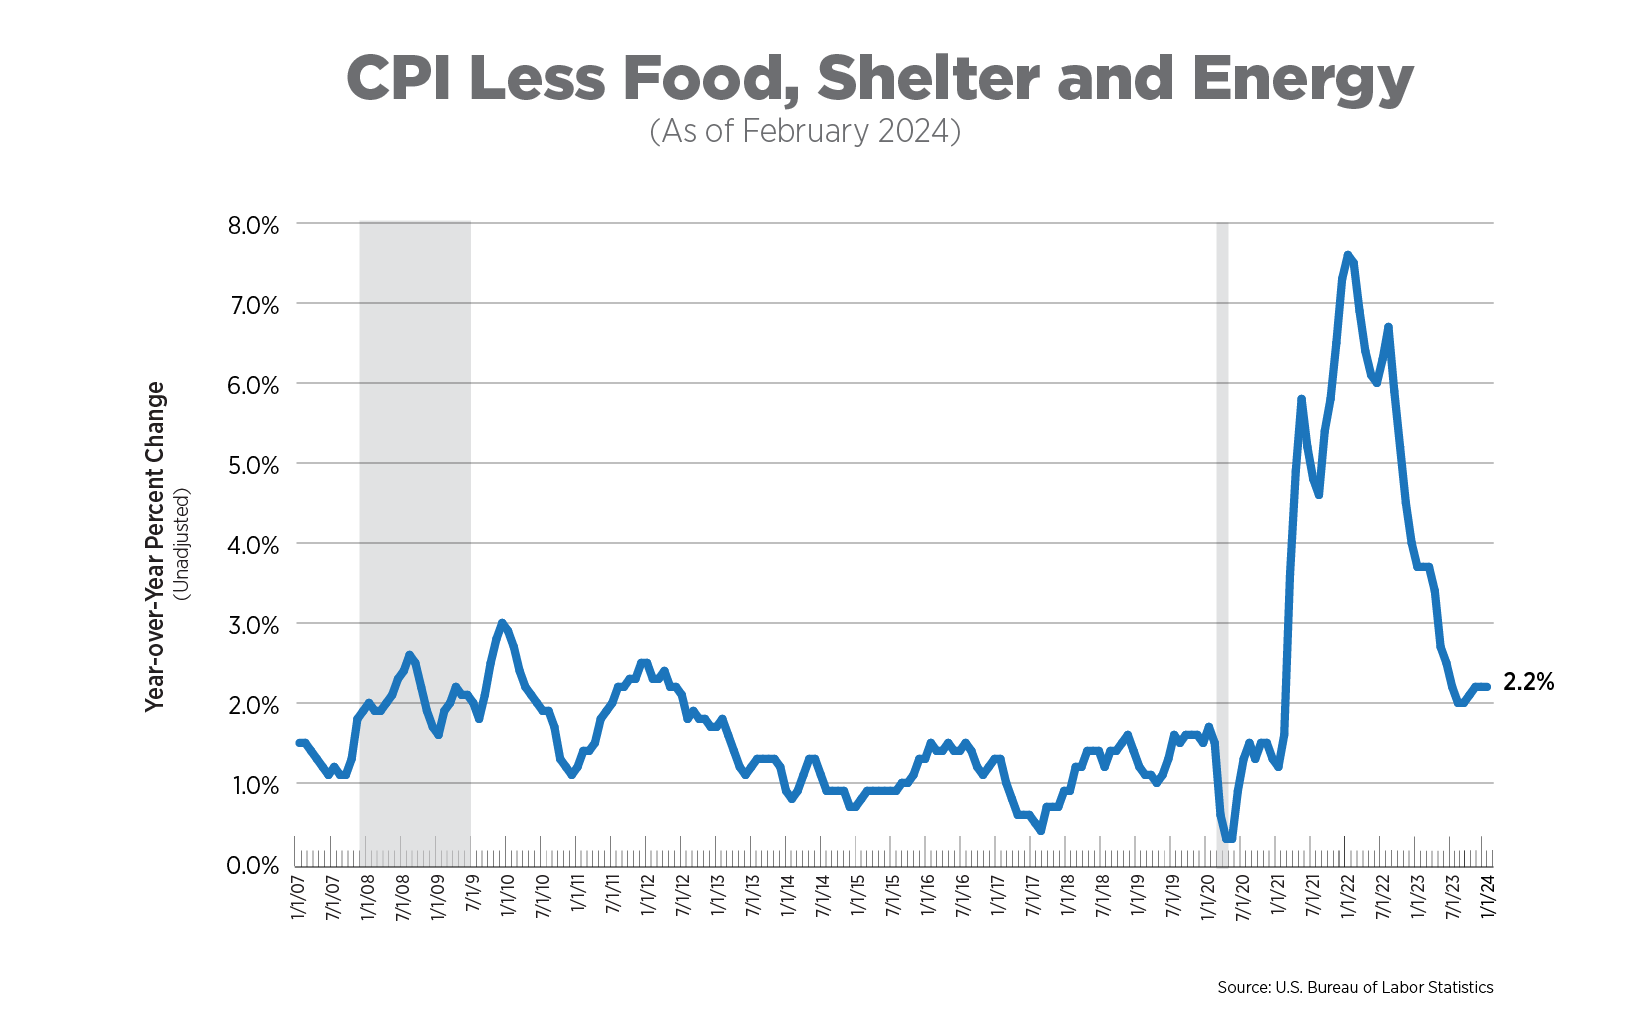 cpi less food, shelter, and energy as of february 2024